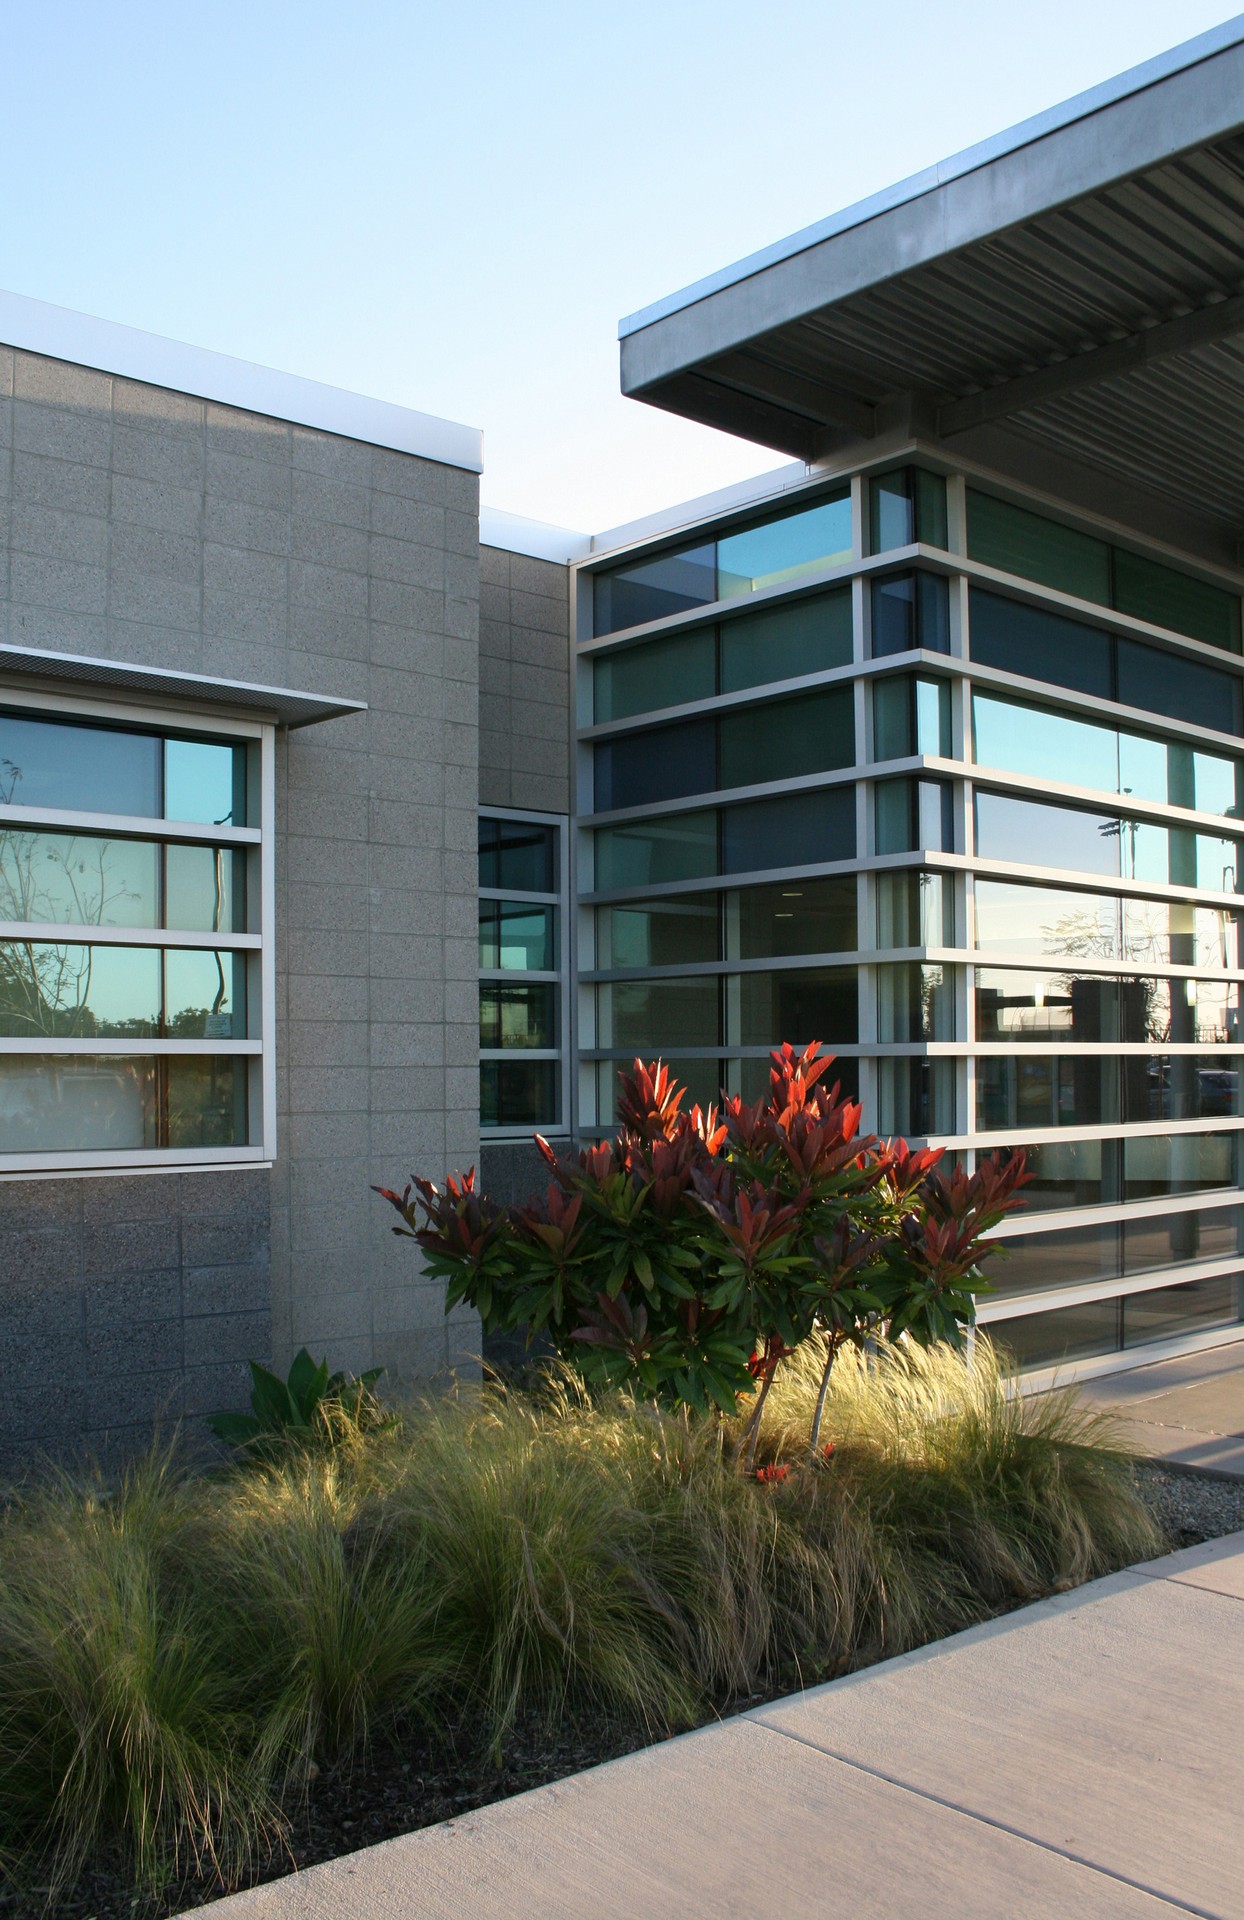 San Diego Mesa College Police Offices